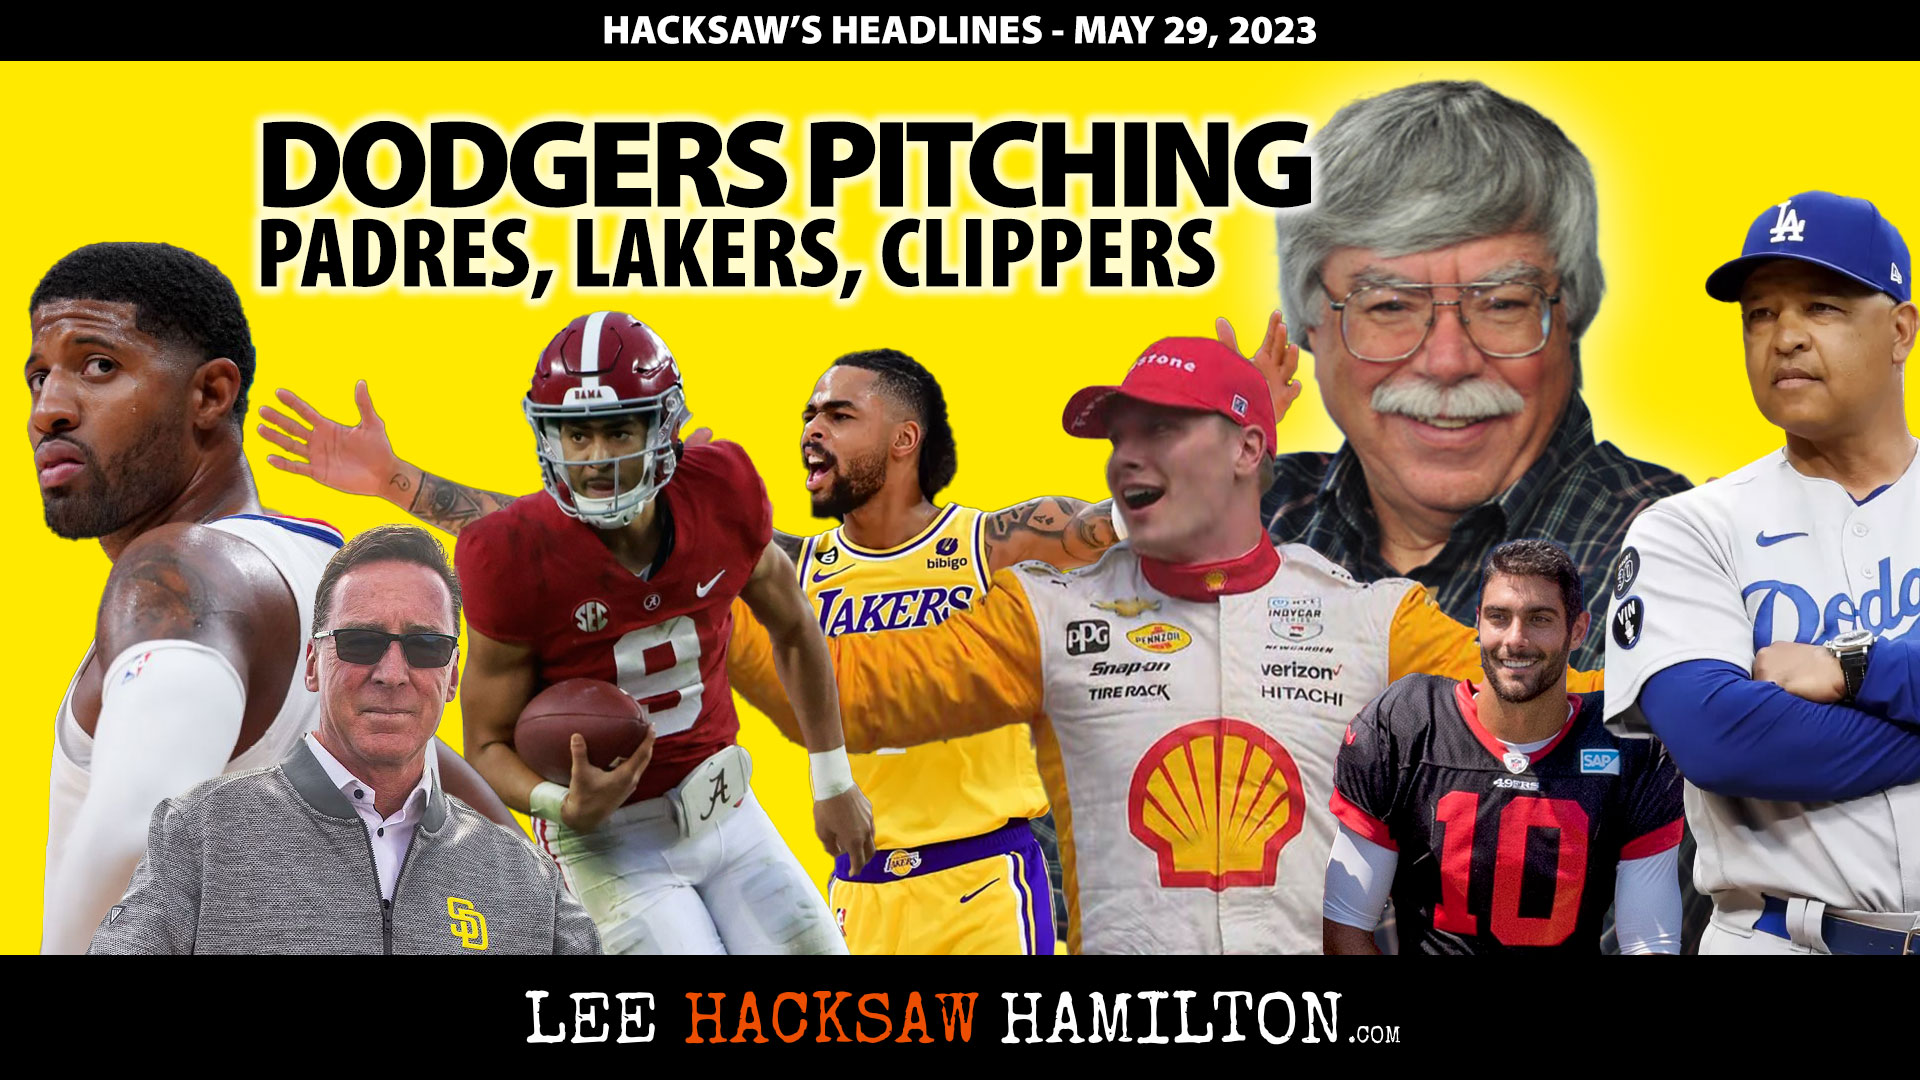 Lee Hacksaw Hamilton discusses Dodgers Pitching, Padres Crisis, Lakers Clippers Salary Cap, NFL QBs